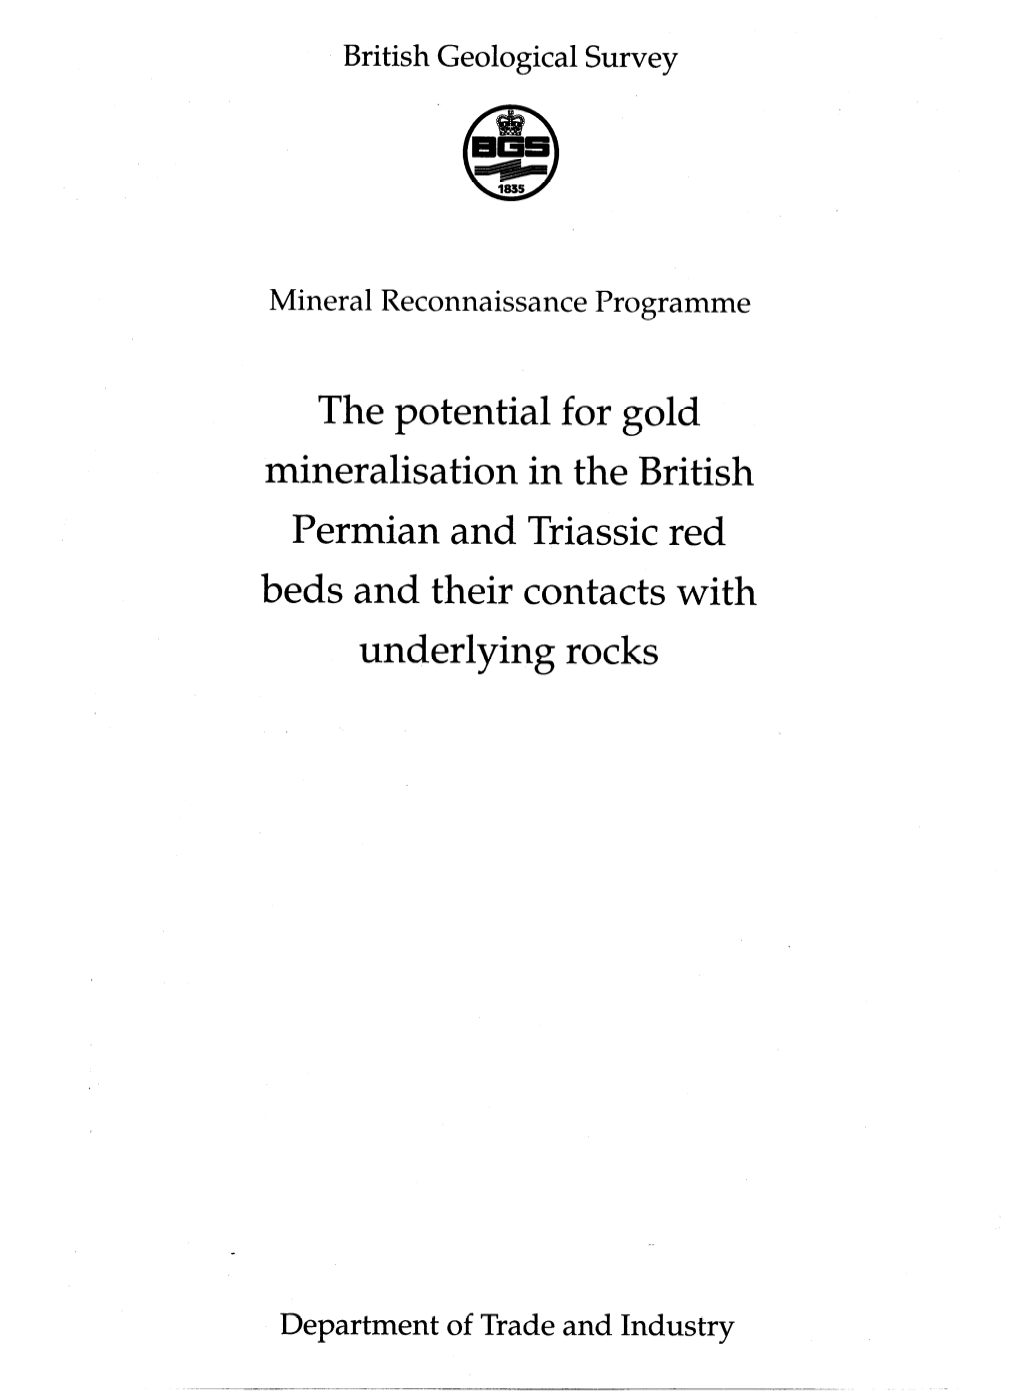 144 the Potential for Gold Mineralisation in the British